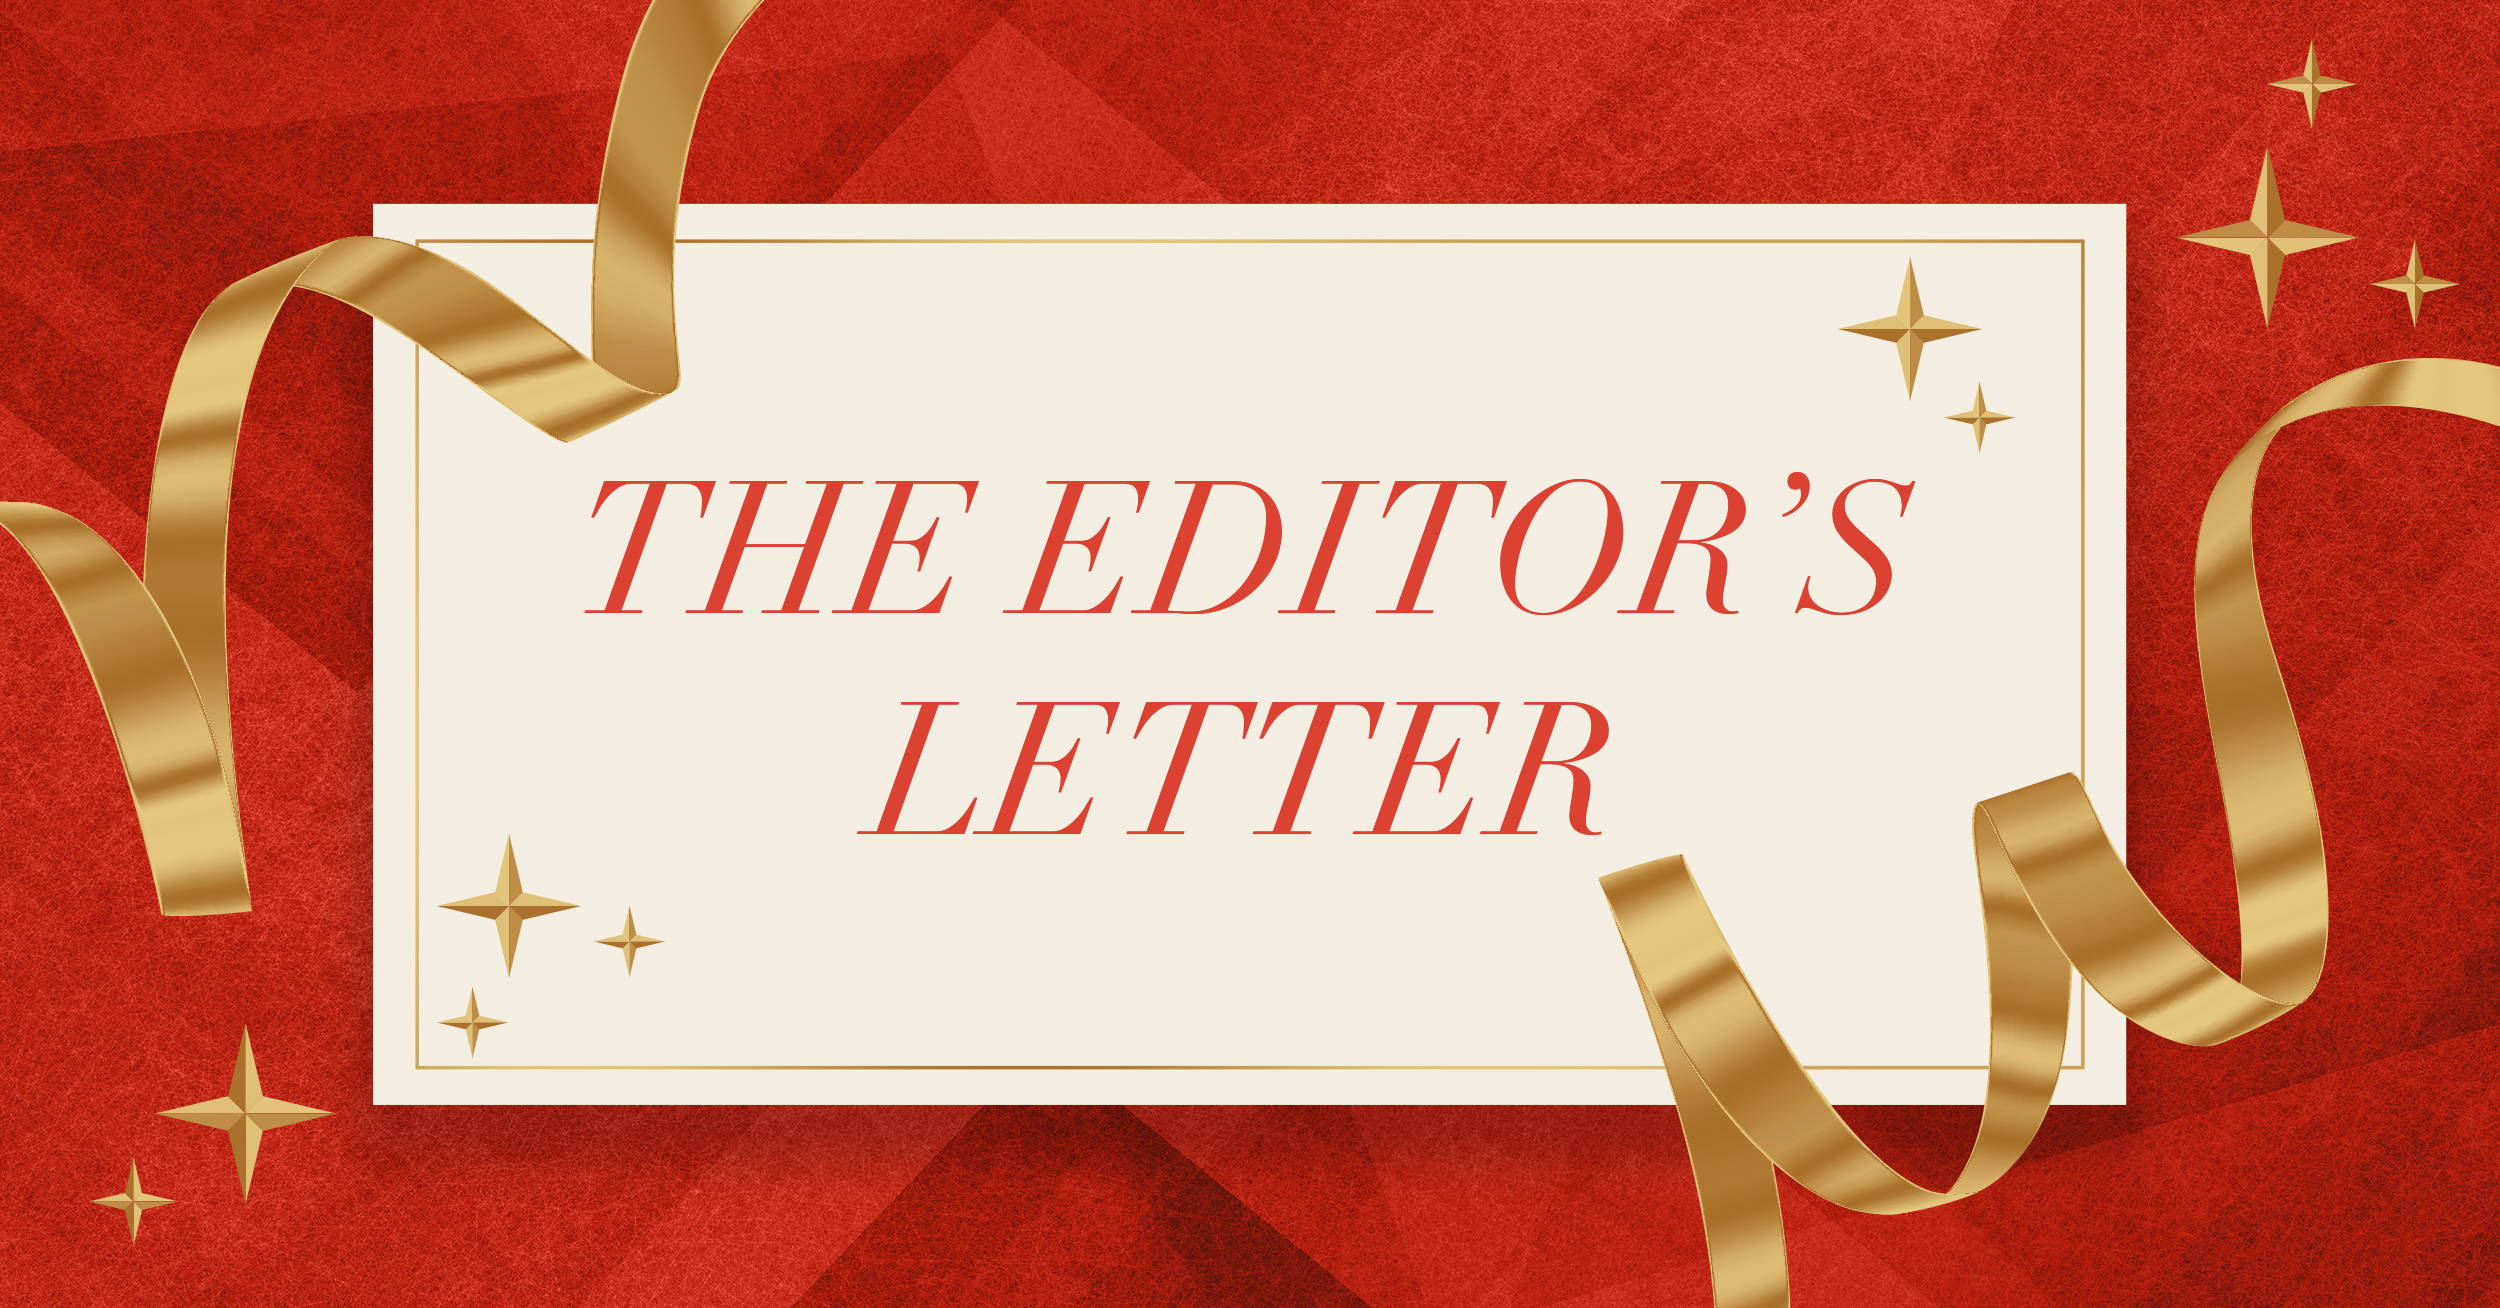 The Editor's Letter: In The Year Ahead, Make It An Exceptional One